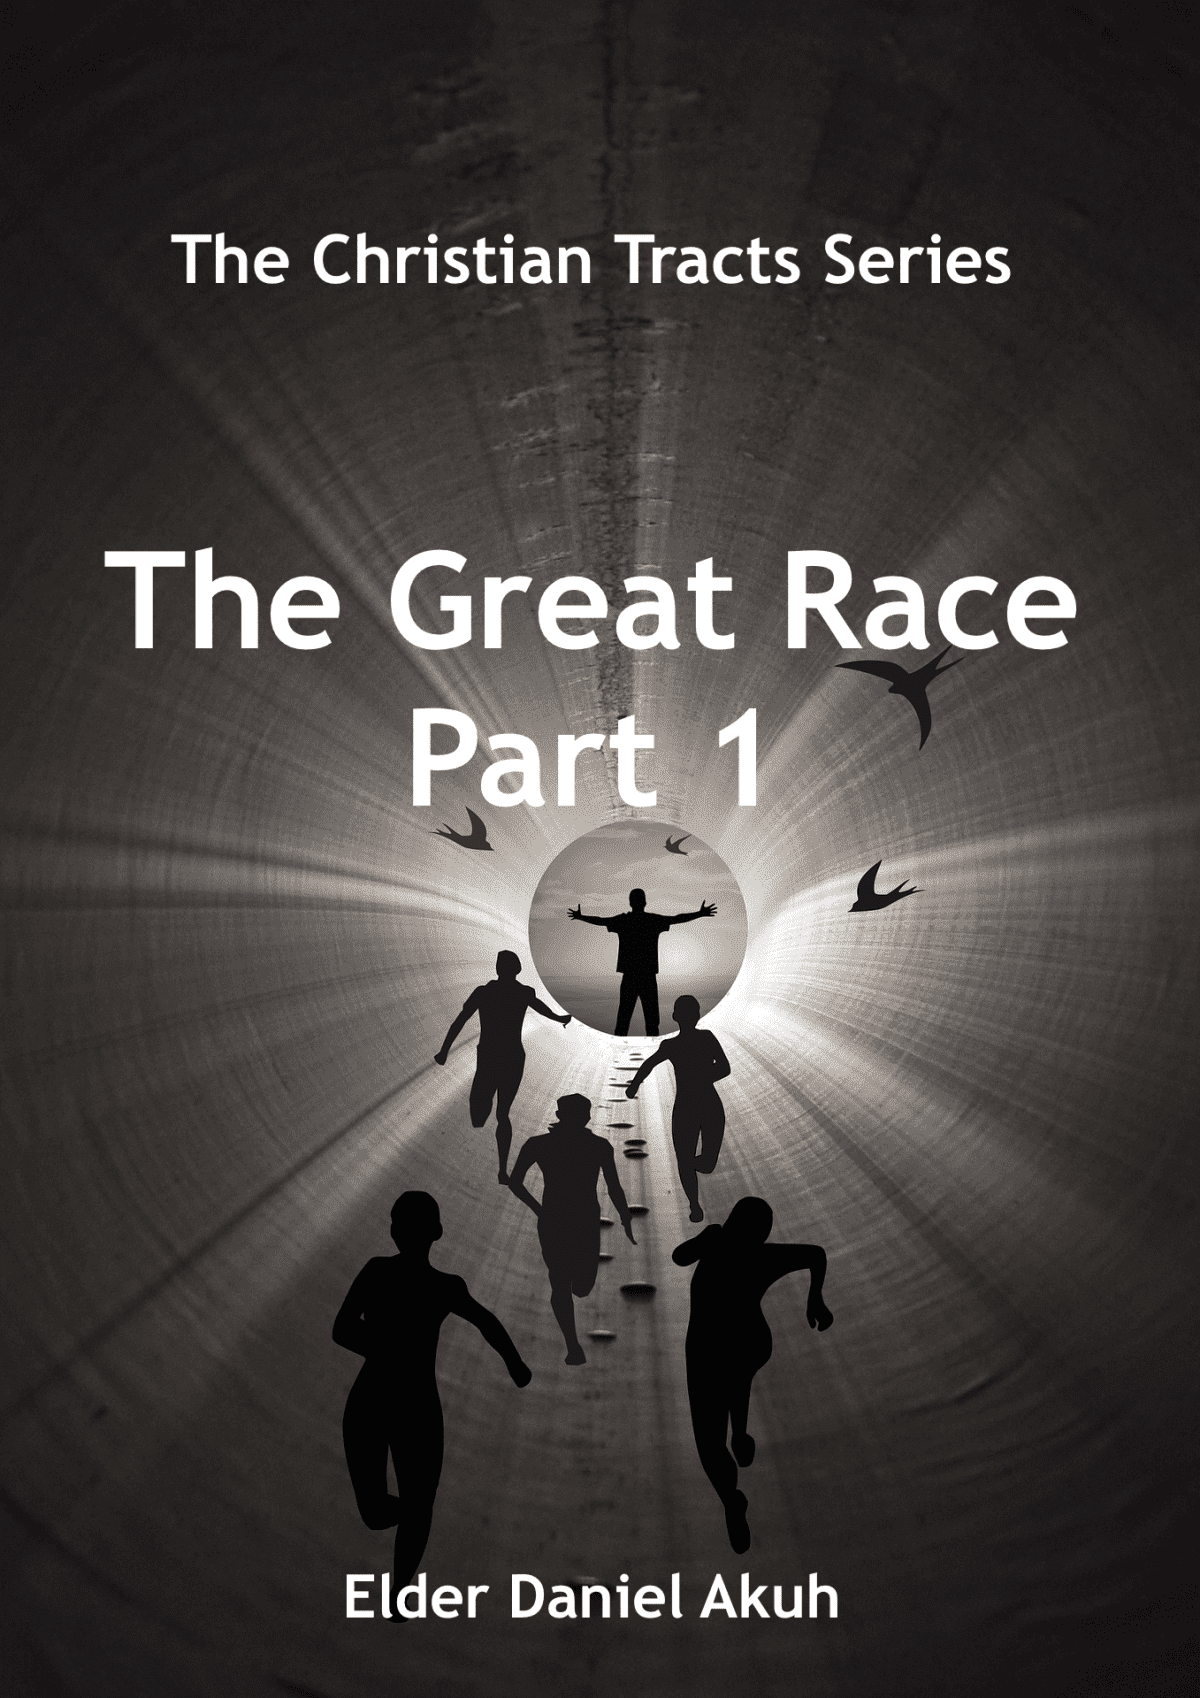 The Great Race part 1 The Christian Tracts Series by Elder Daniel Akuh